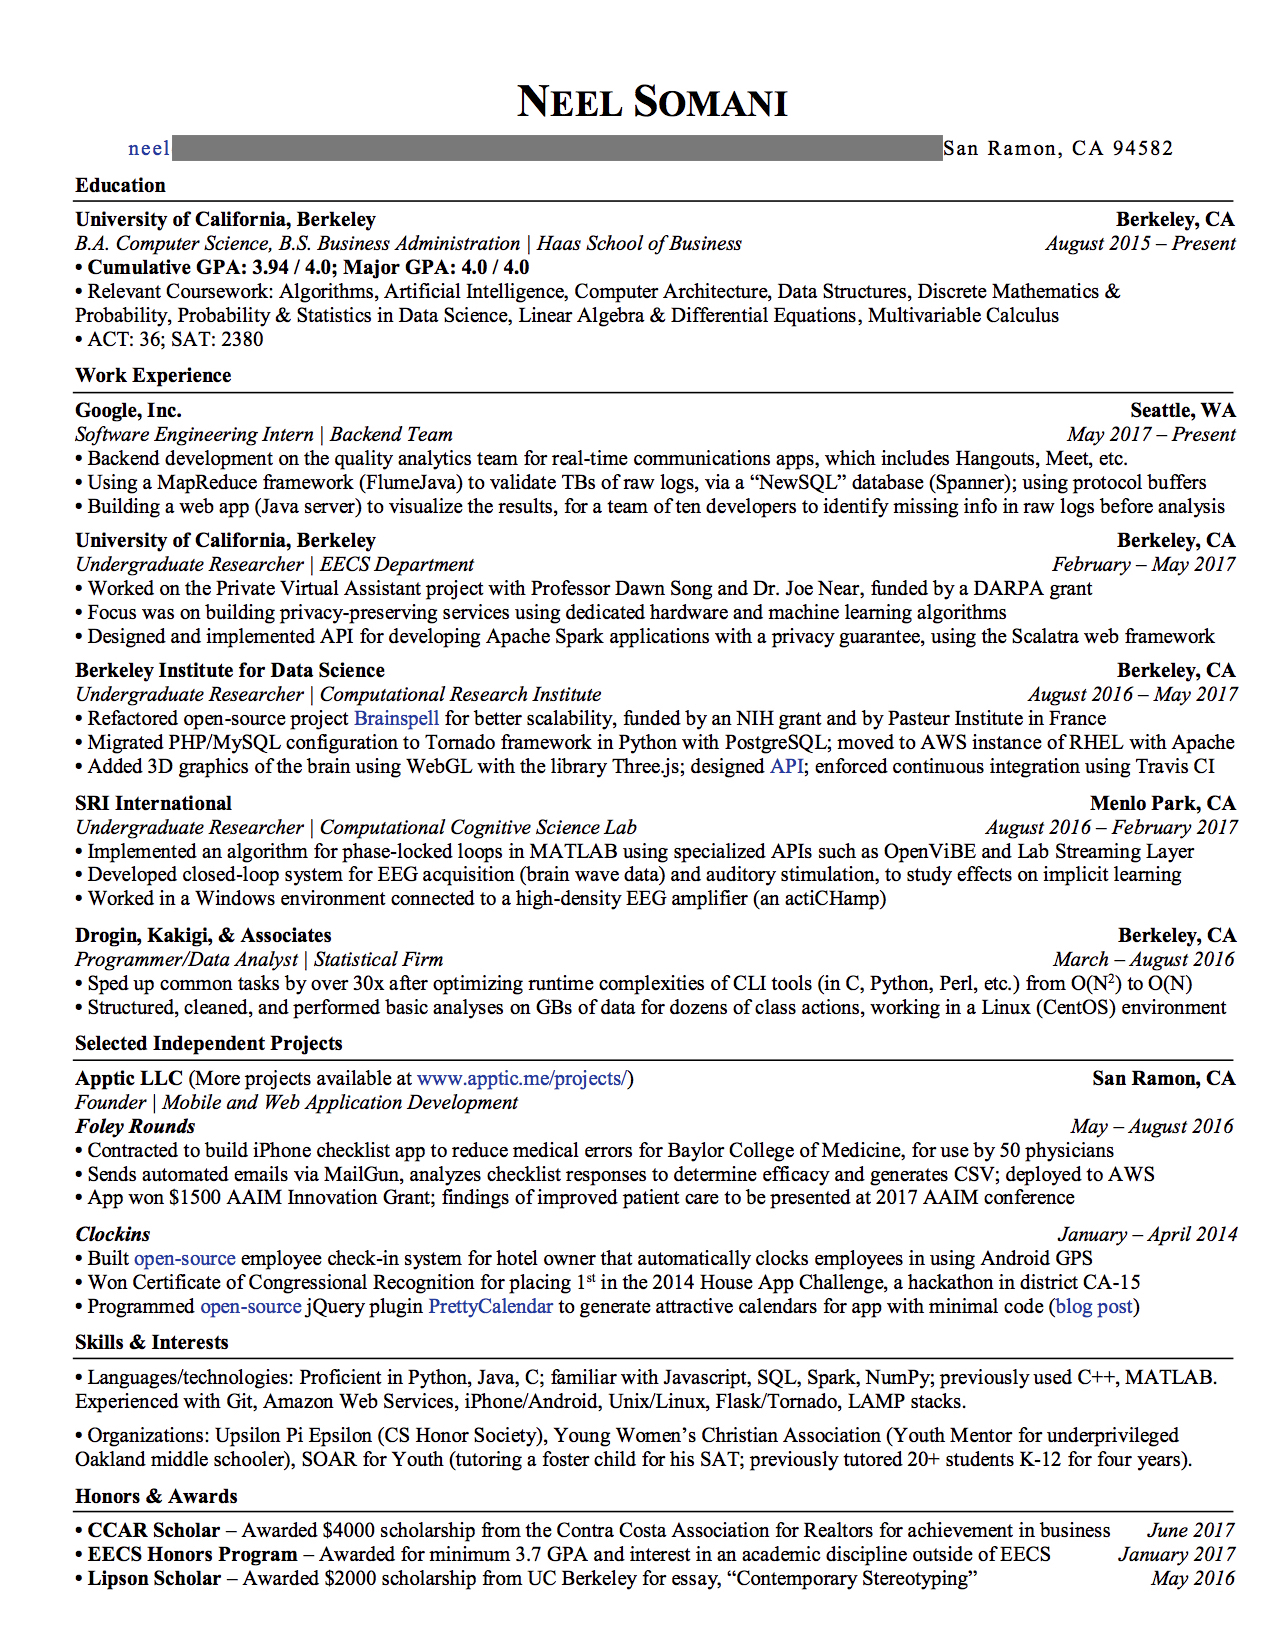 this resume got me internship offers from google nsa more